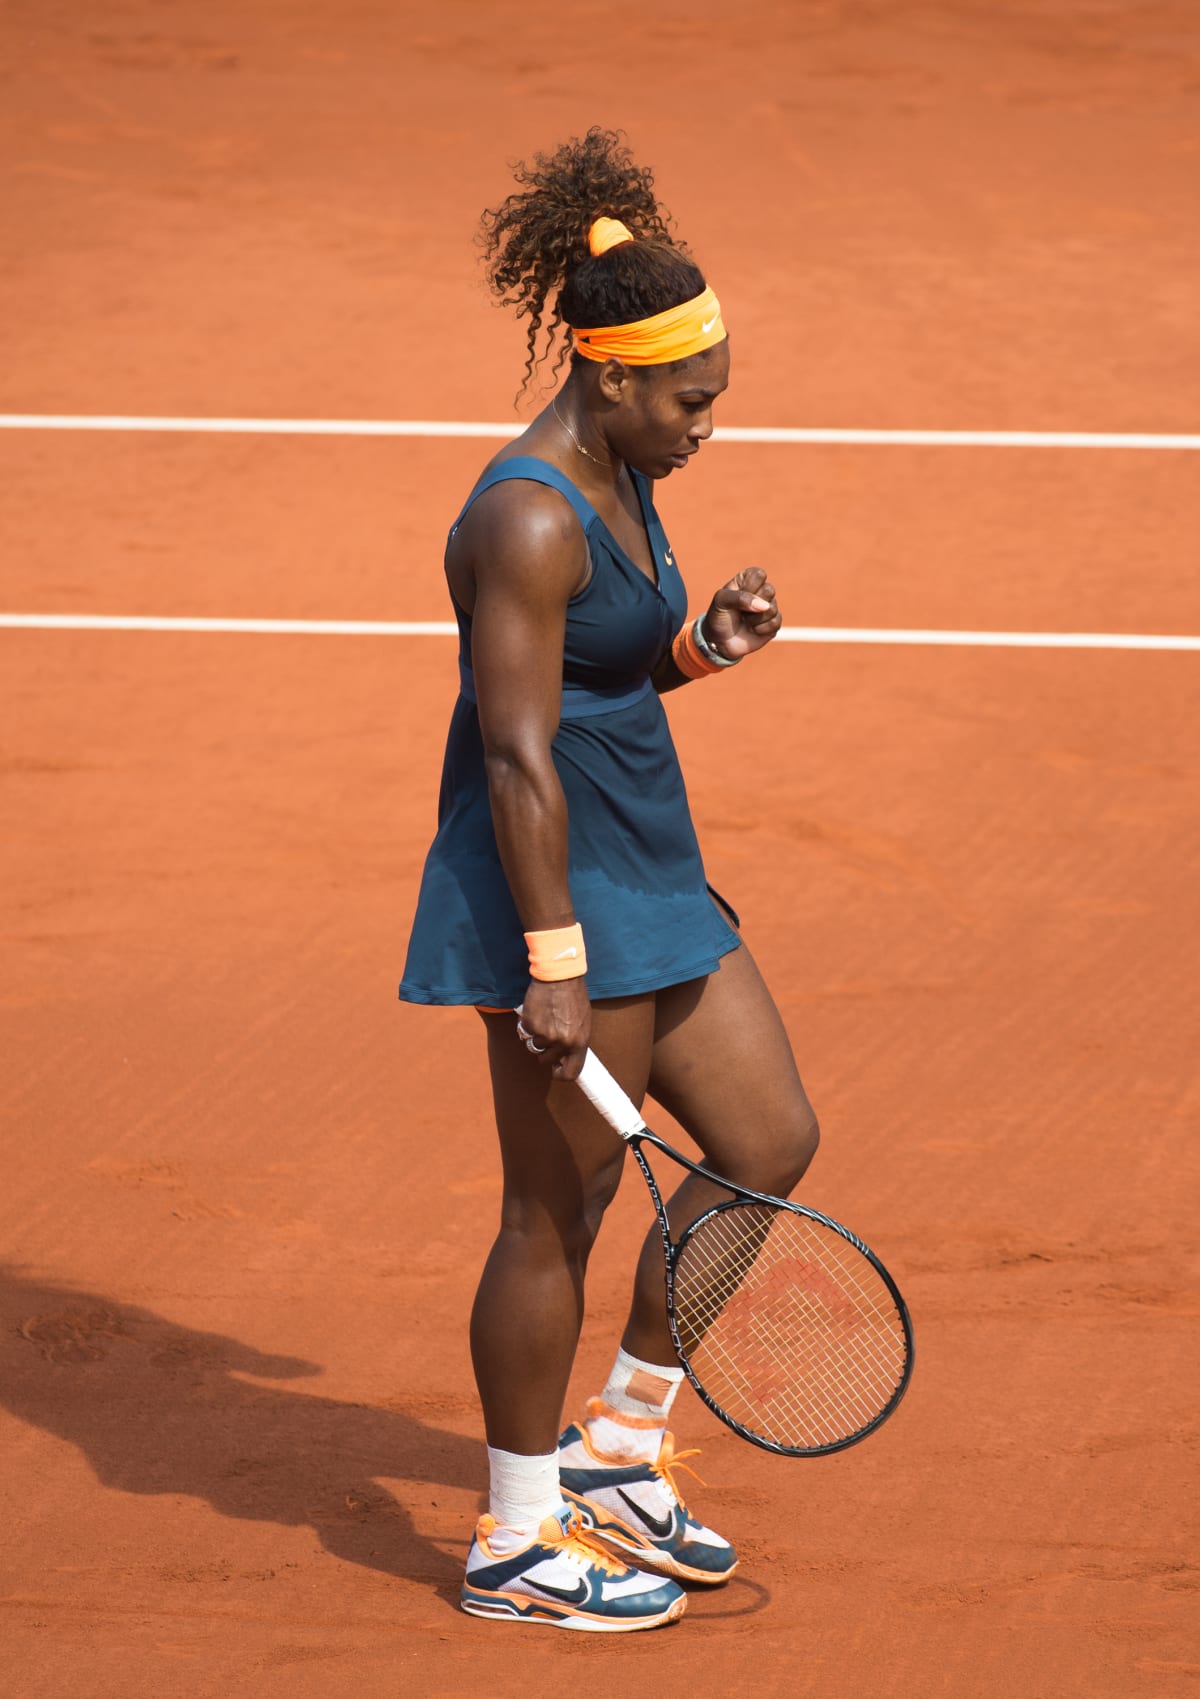 Serena Williams Wins the 2013 French Open in the Nike Air Max Mirabella